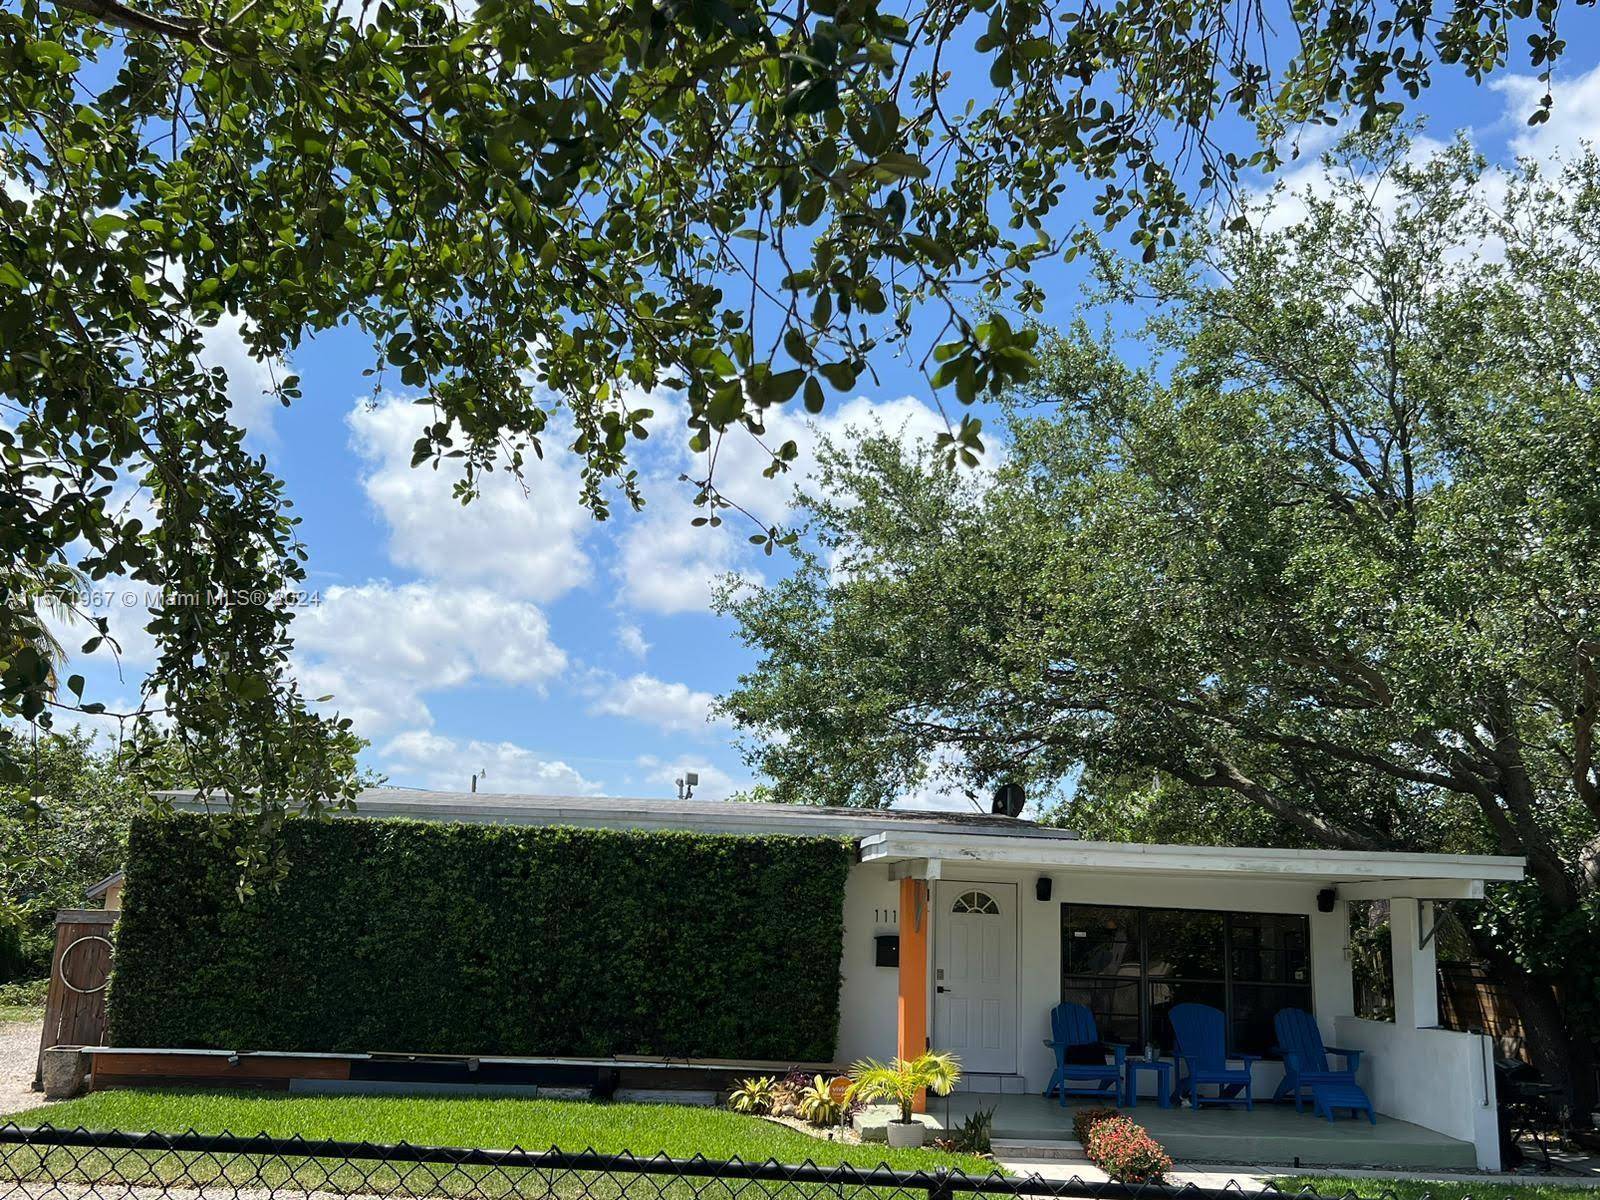 This is an excellent opportunity for investors or first time homebuyers, featuring a big private backyard with a shaded patio area, all available with no HOA fees.